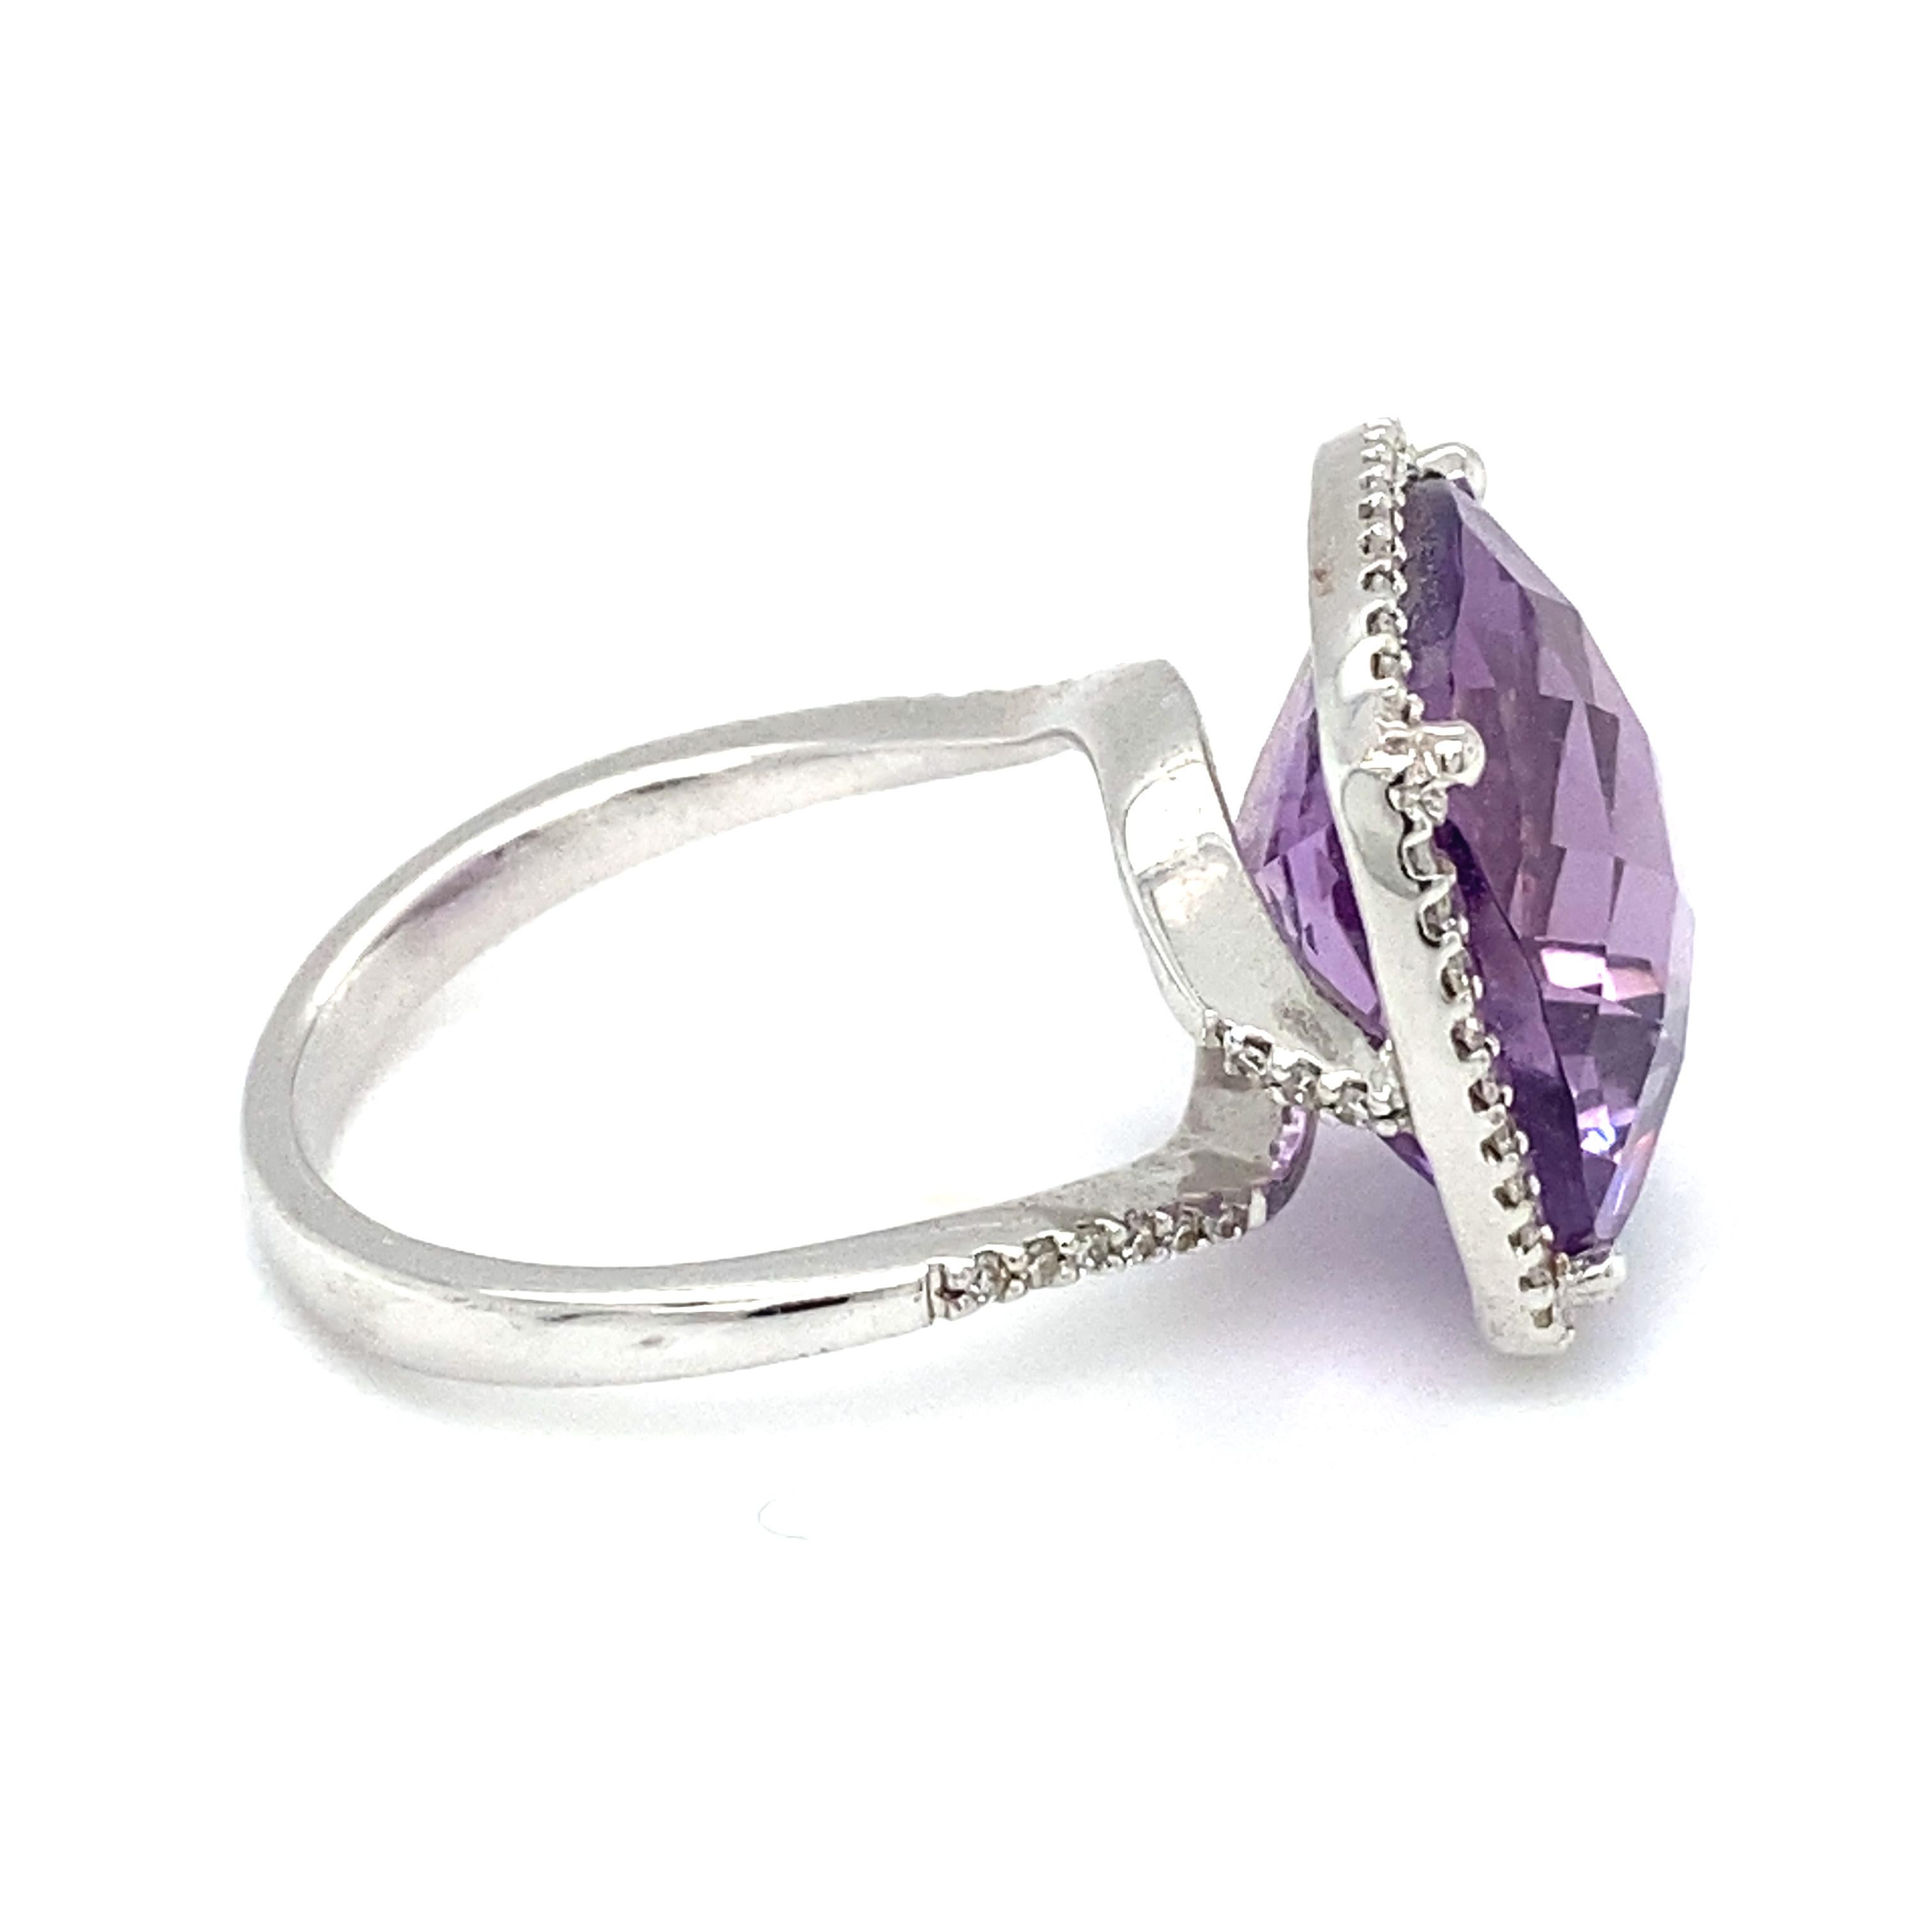 Square Cut 2000s 8 Carat Amethyst and Diamond Cocktail Ring in 14 Karat White Gold For Sale